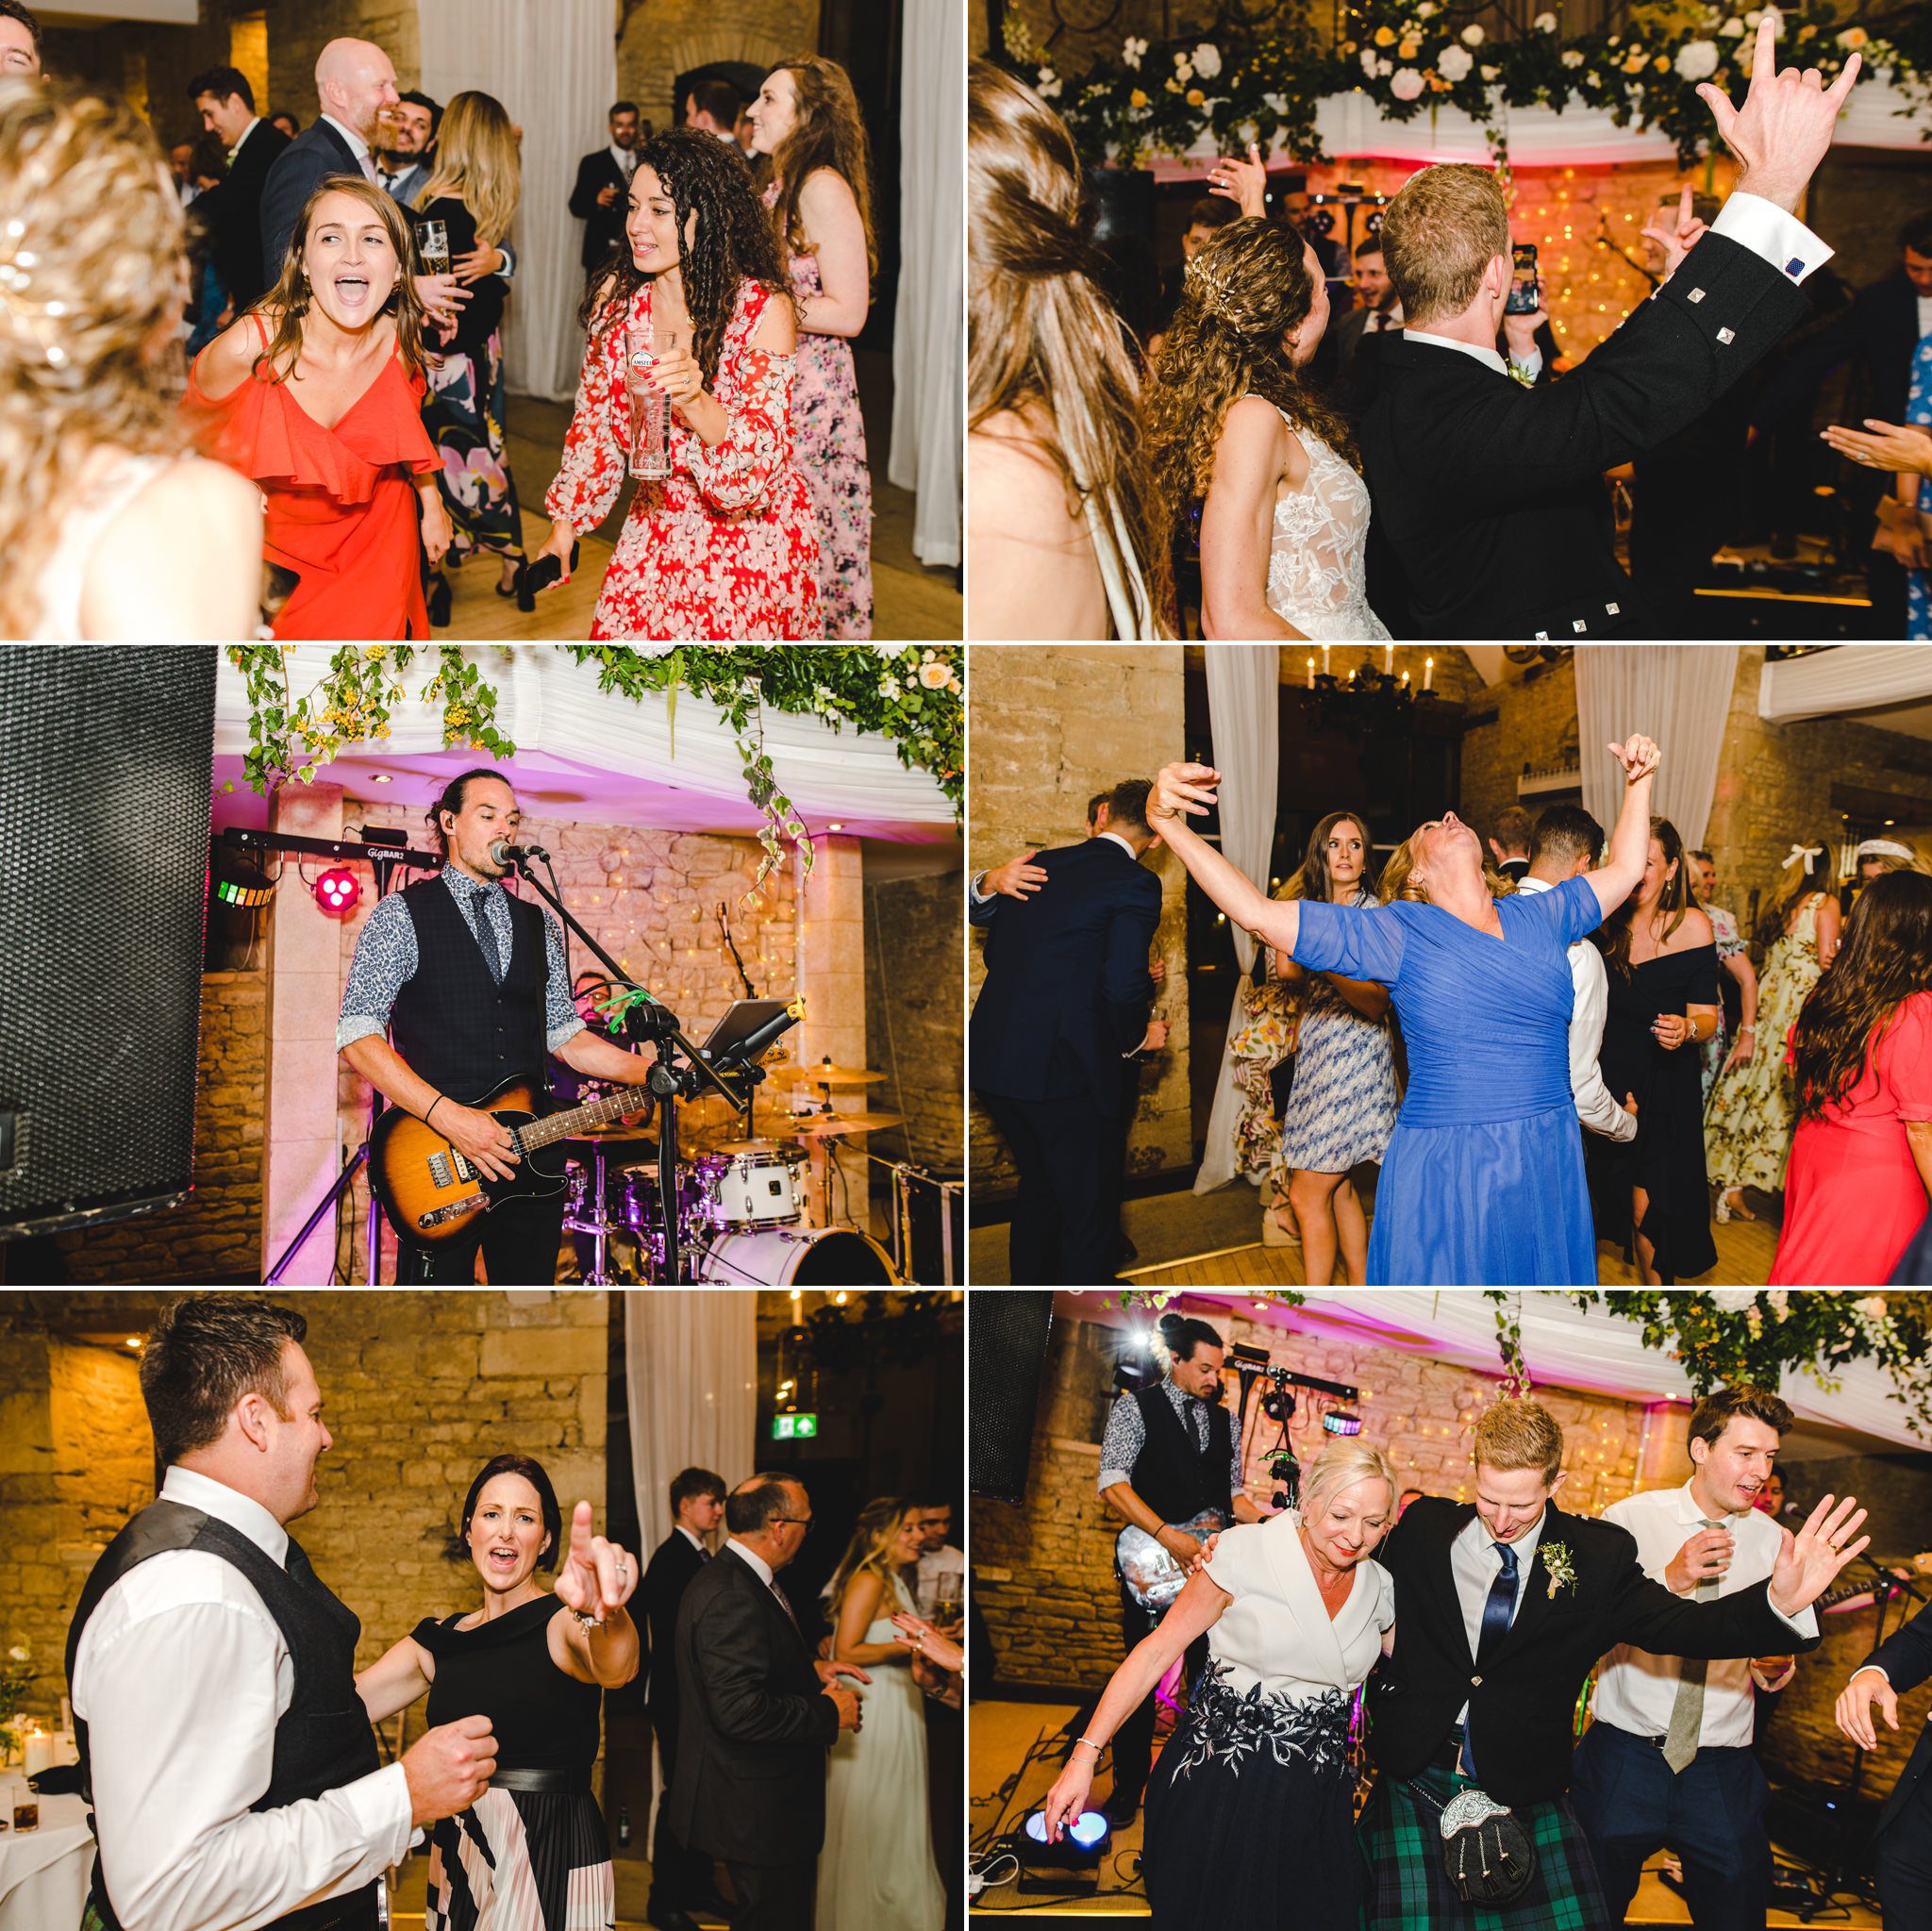 Dancing at The Great Tythe Barn by Bigeye Photography